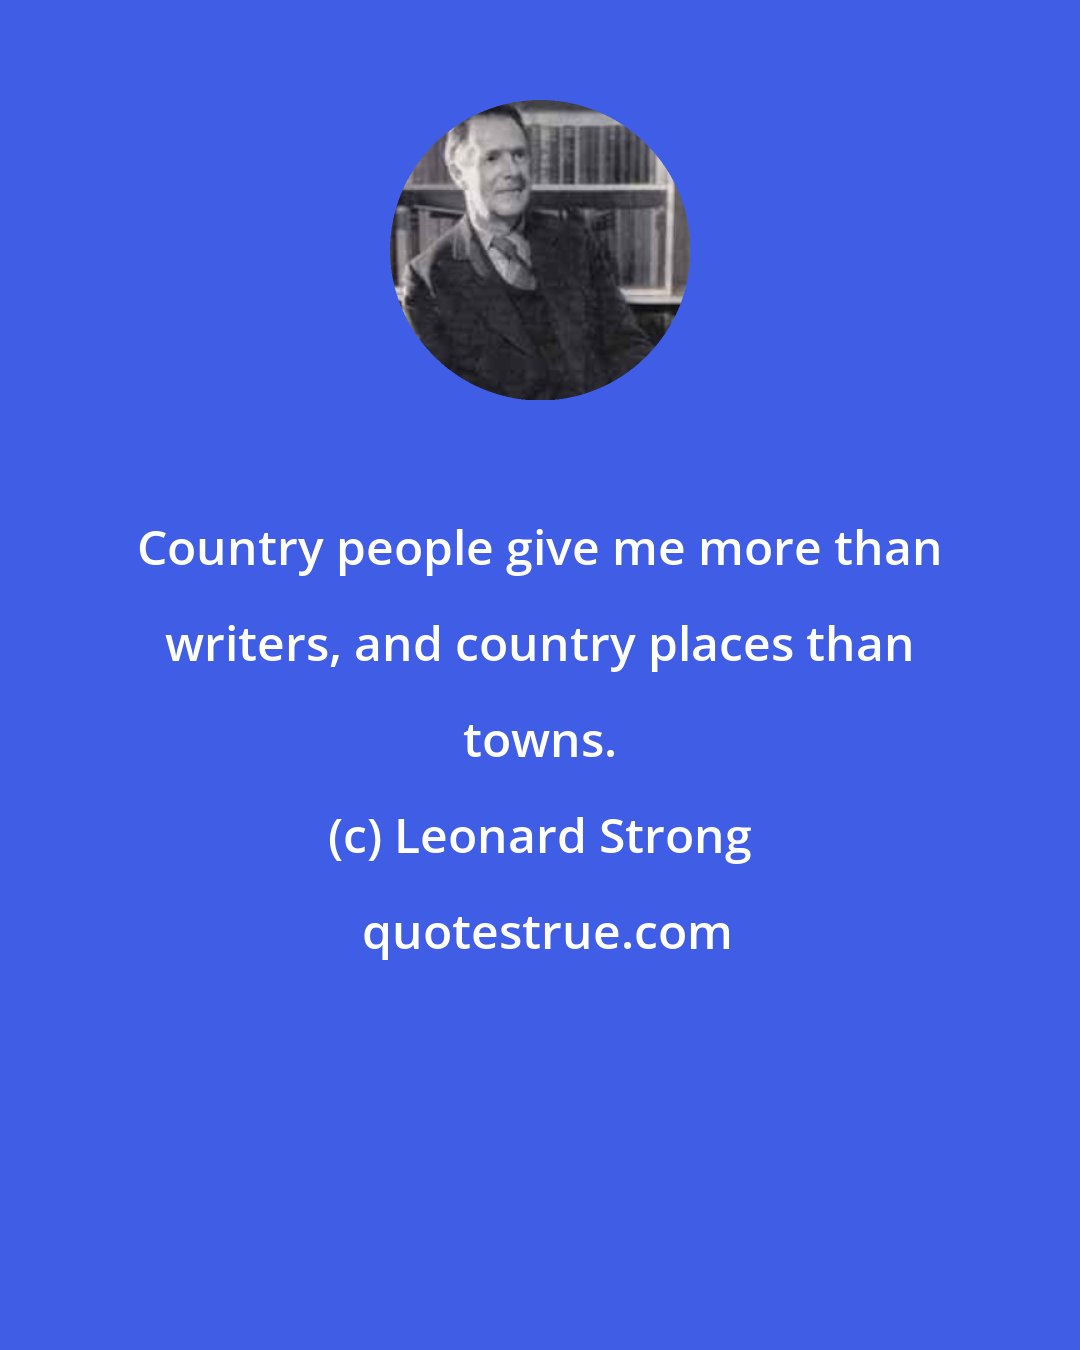 Leonard Strong: Country people give me more than writers, and country places than towns.